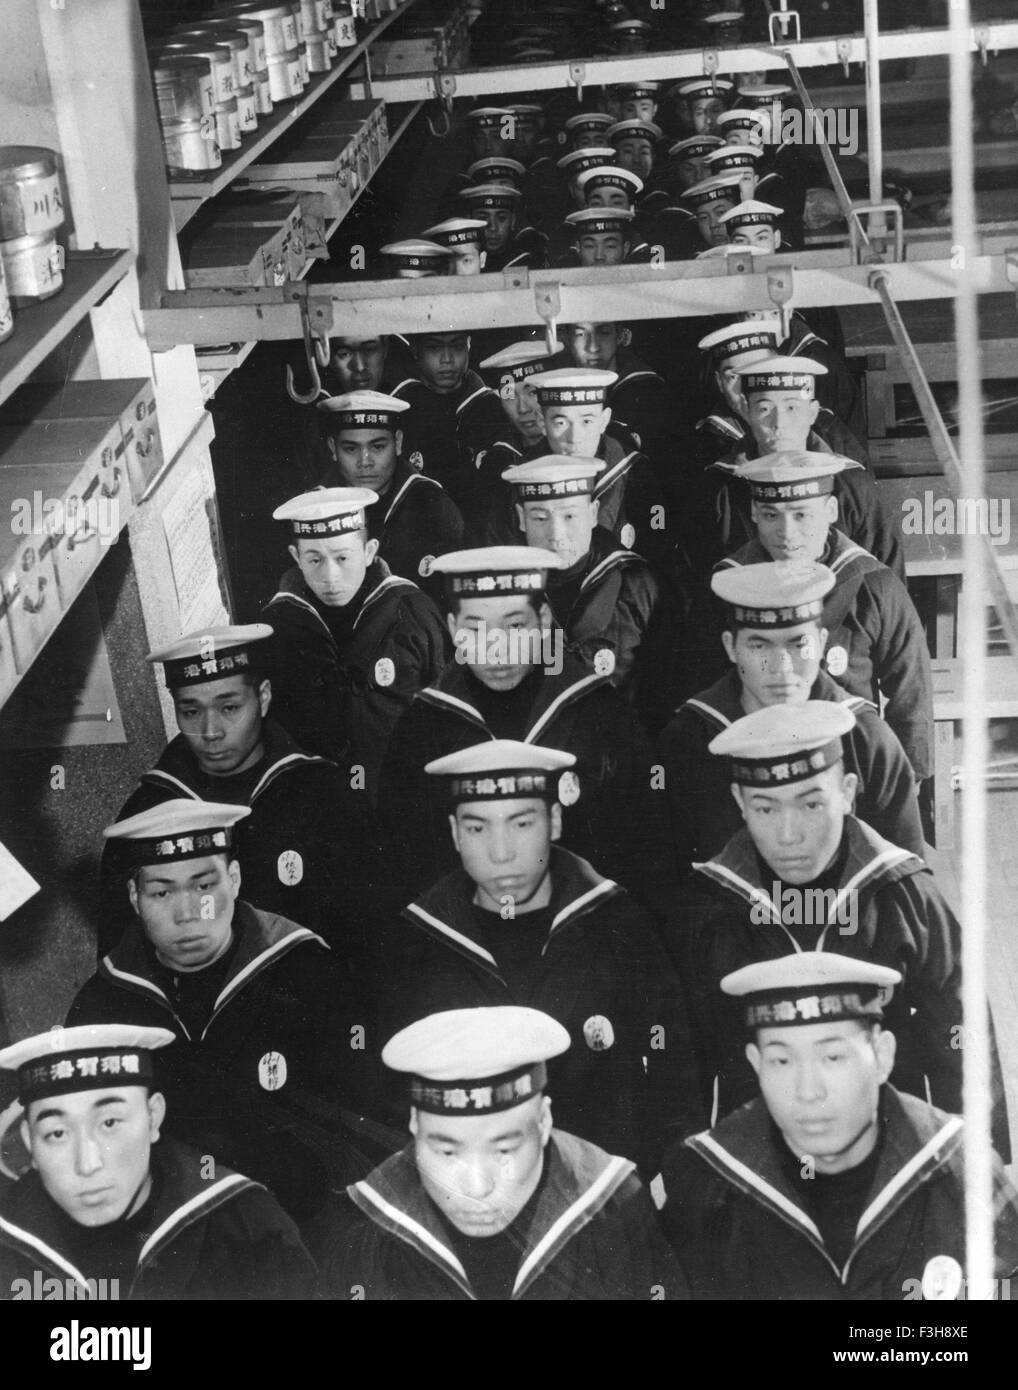 JAPANESE NAVY SAILORS about 1943 Stock Photo